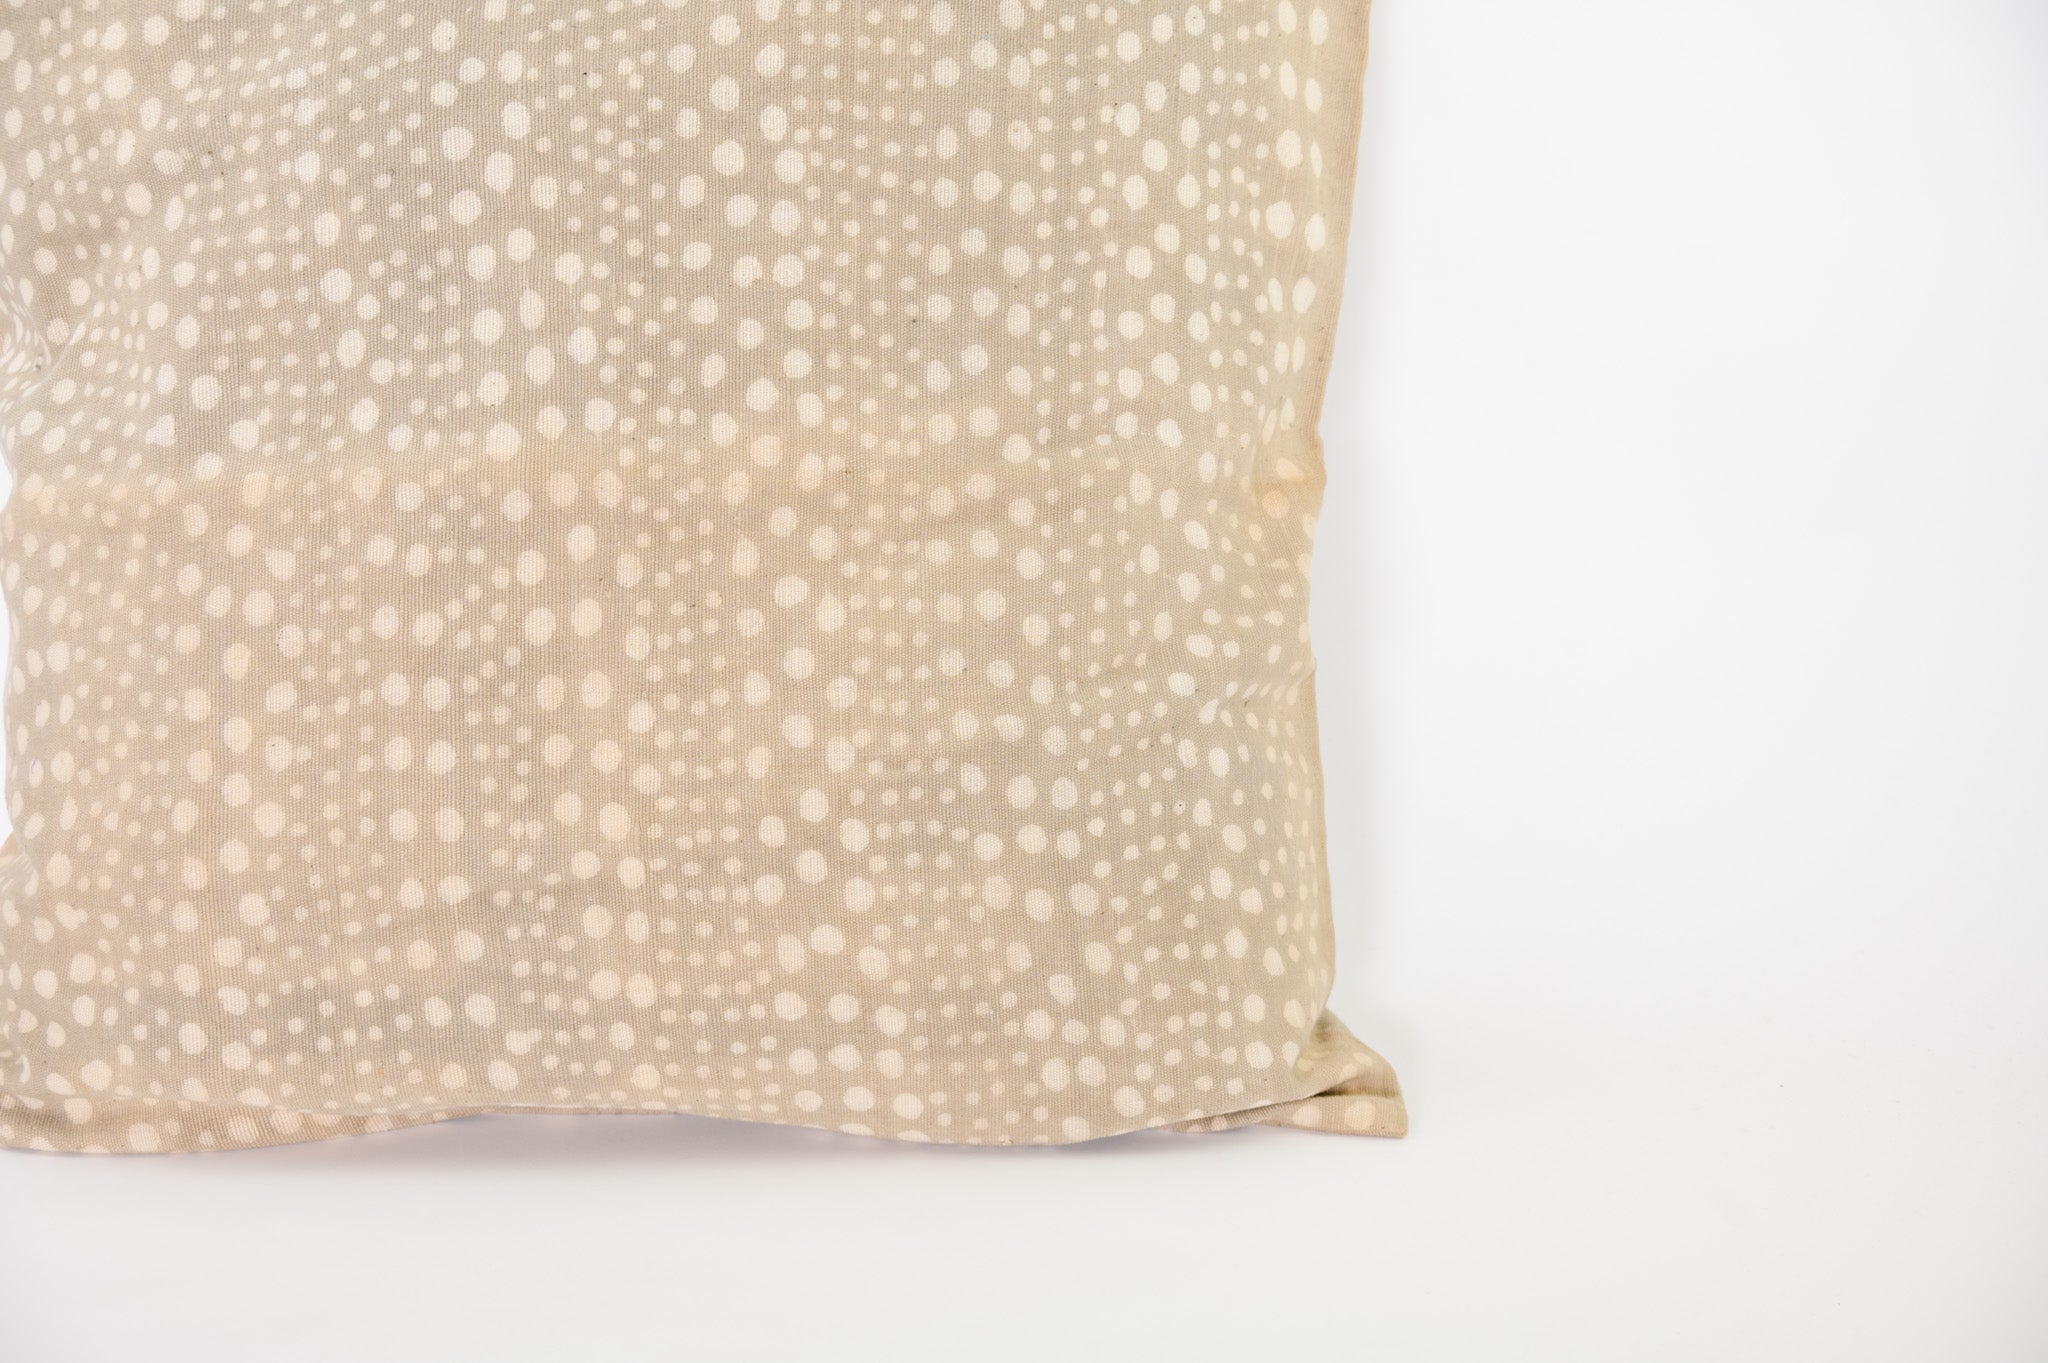 DOTS MUDCLOTH pillow cover GRAY 18"